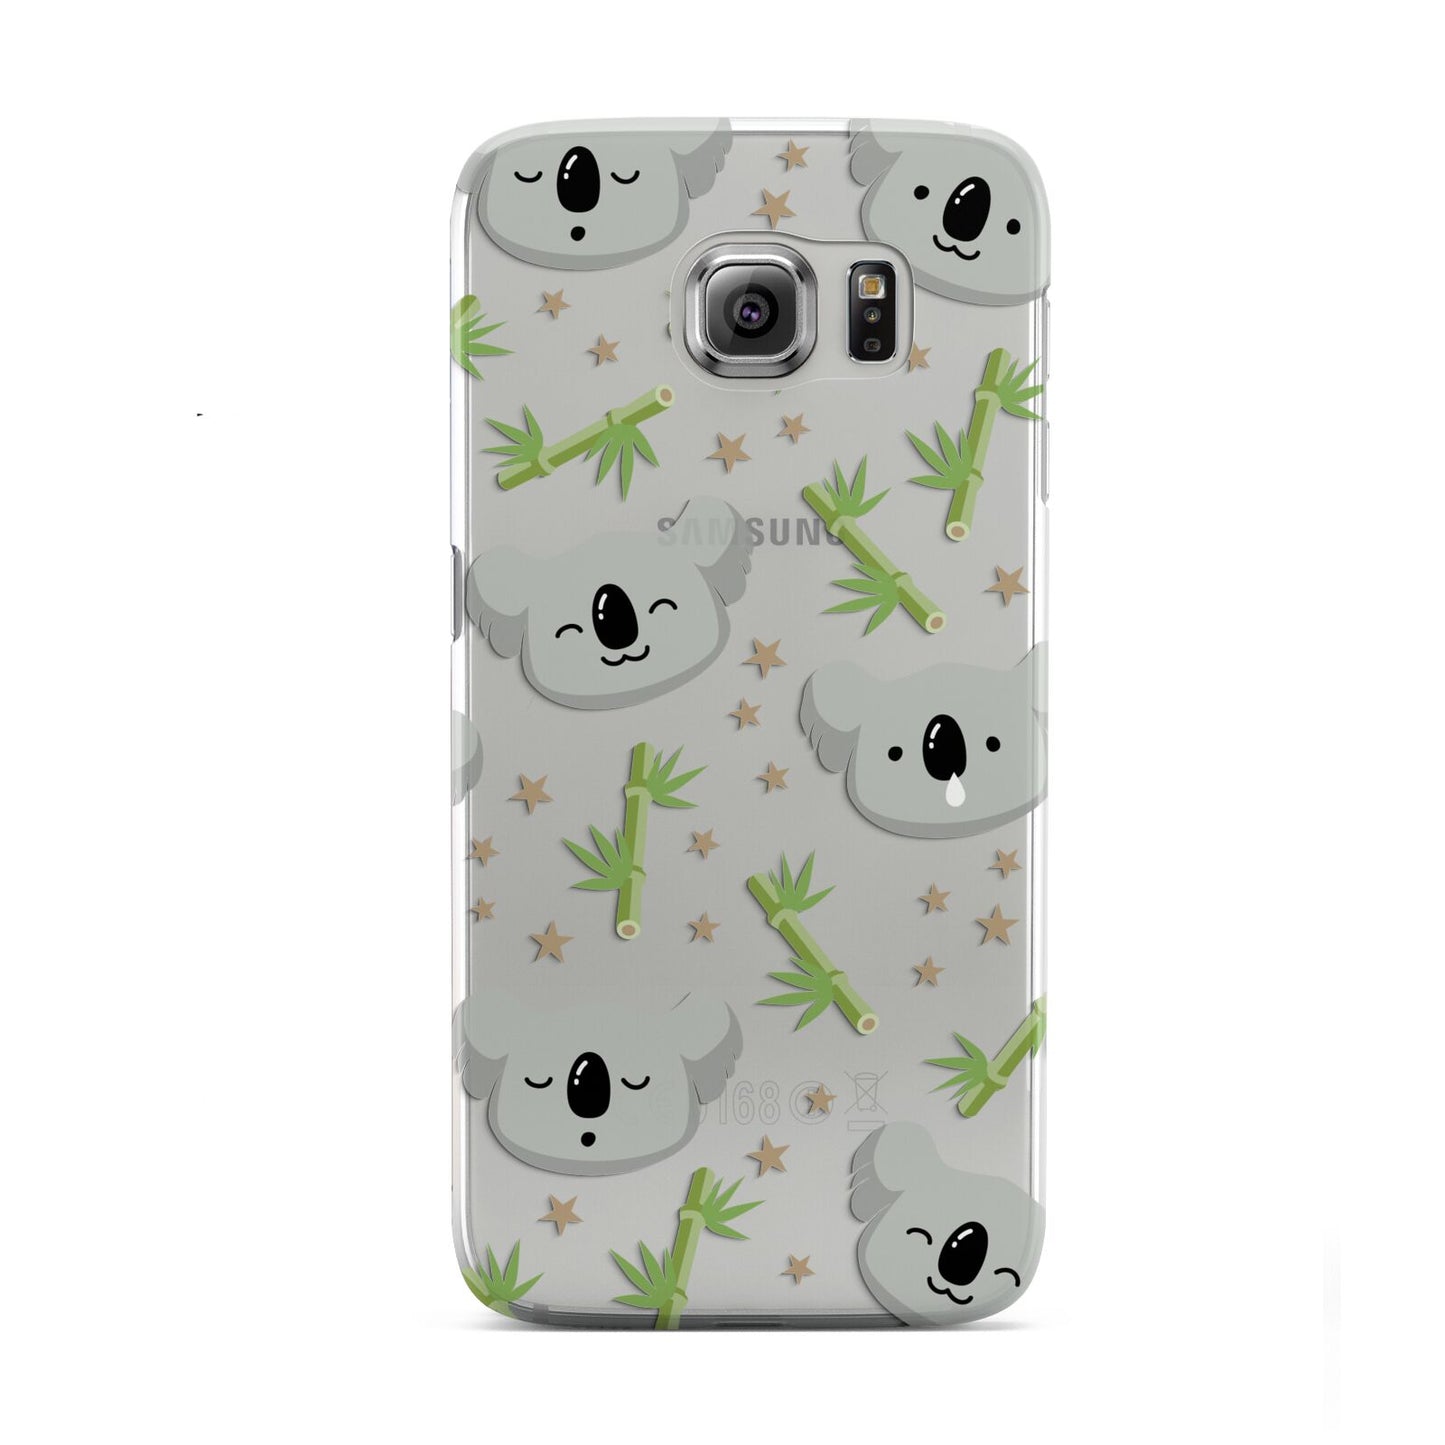 Koala Faces with Transparent Background Samsung Galaxy S6 Case